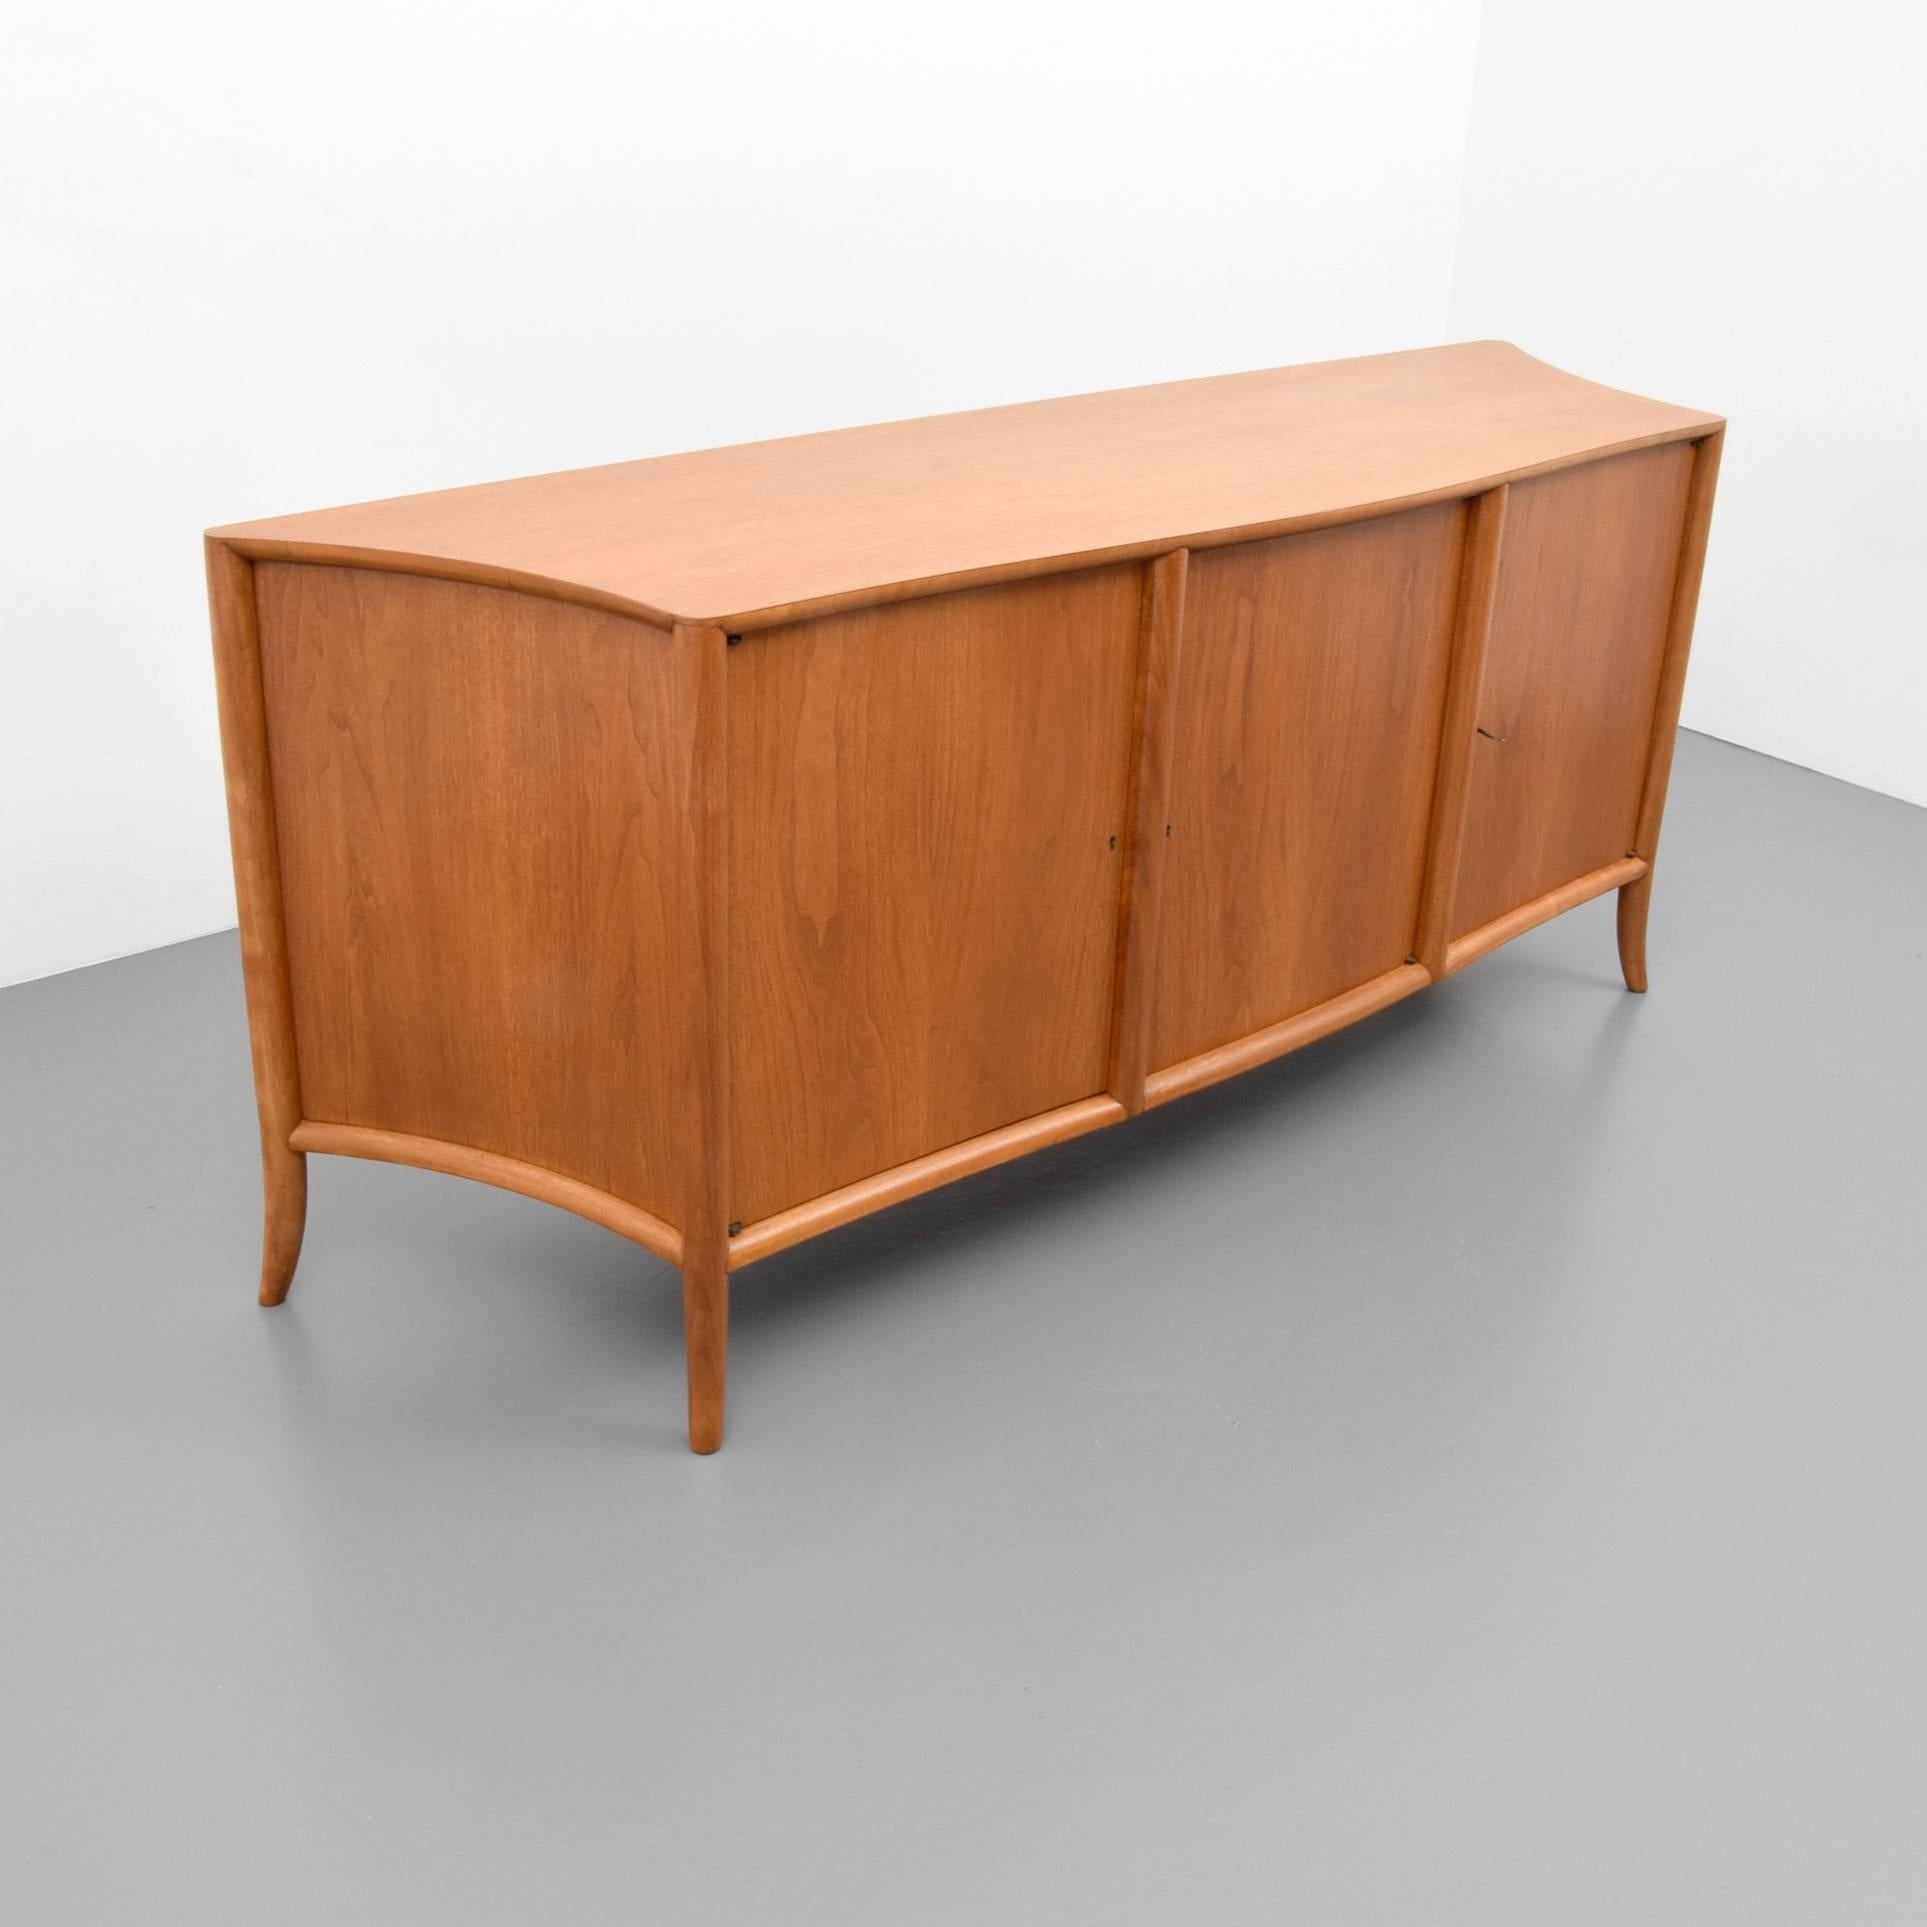 Cabinet/server by T.H. Robsjohn Gibbings for Widdicomb. Cabinet has saber/splayed legs and three keyed doors revealing a total of four pull-out drawers and three adjustable shelves.

T. H. Robsjohn Gibbings’ design is known for elegance and stature.